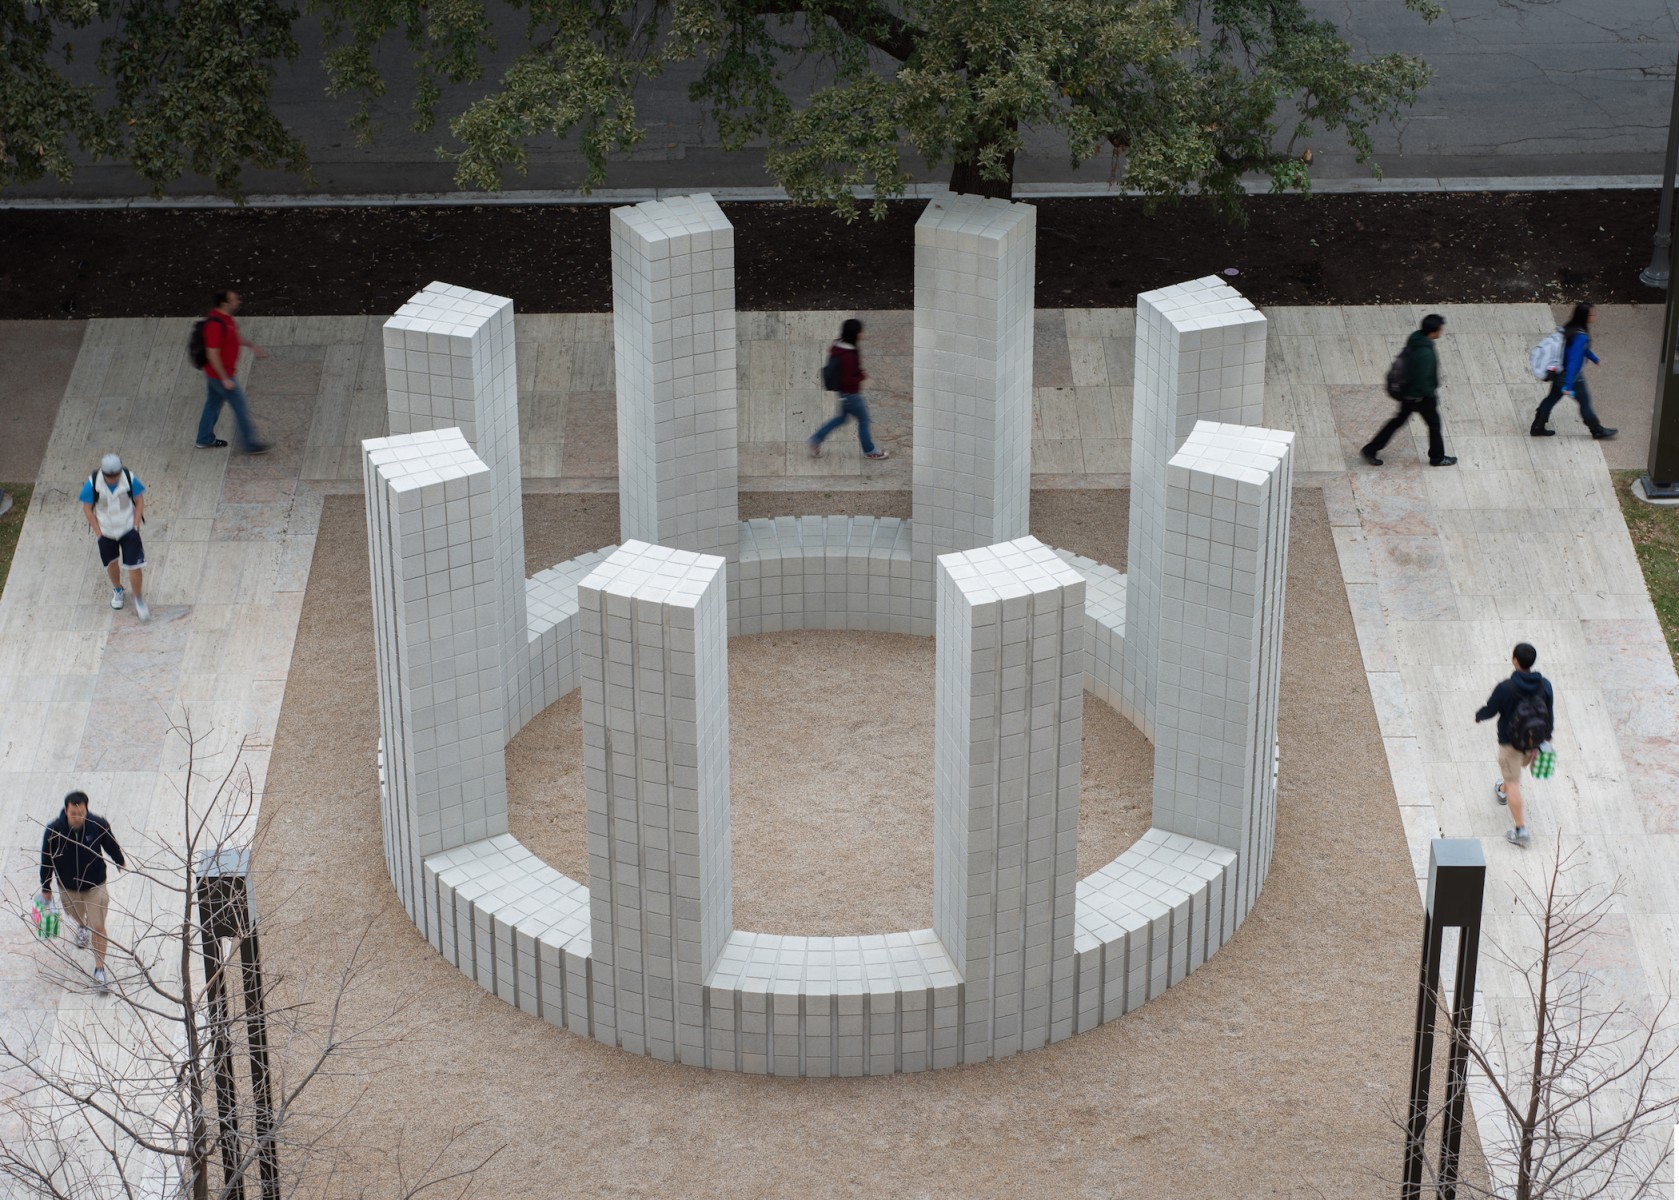 A photo of the actual sculpture on the University of Texas campus